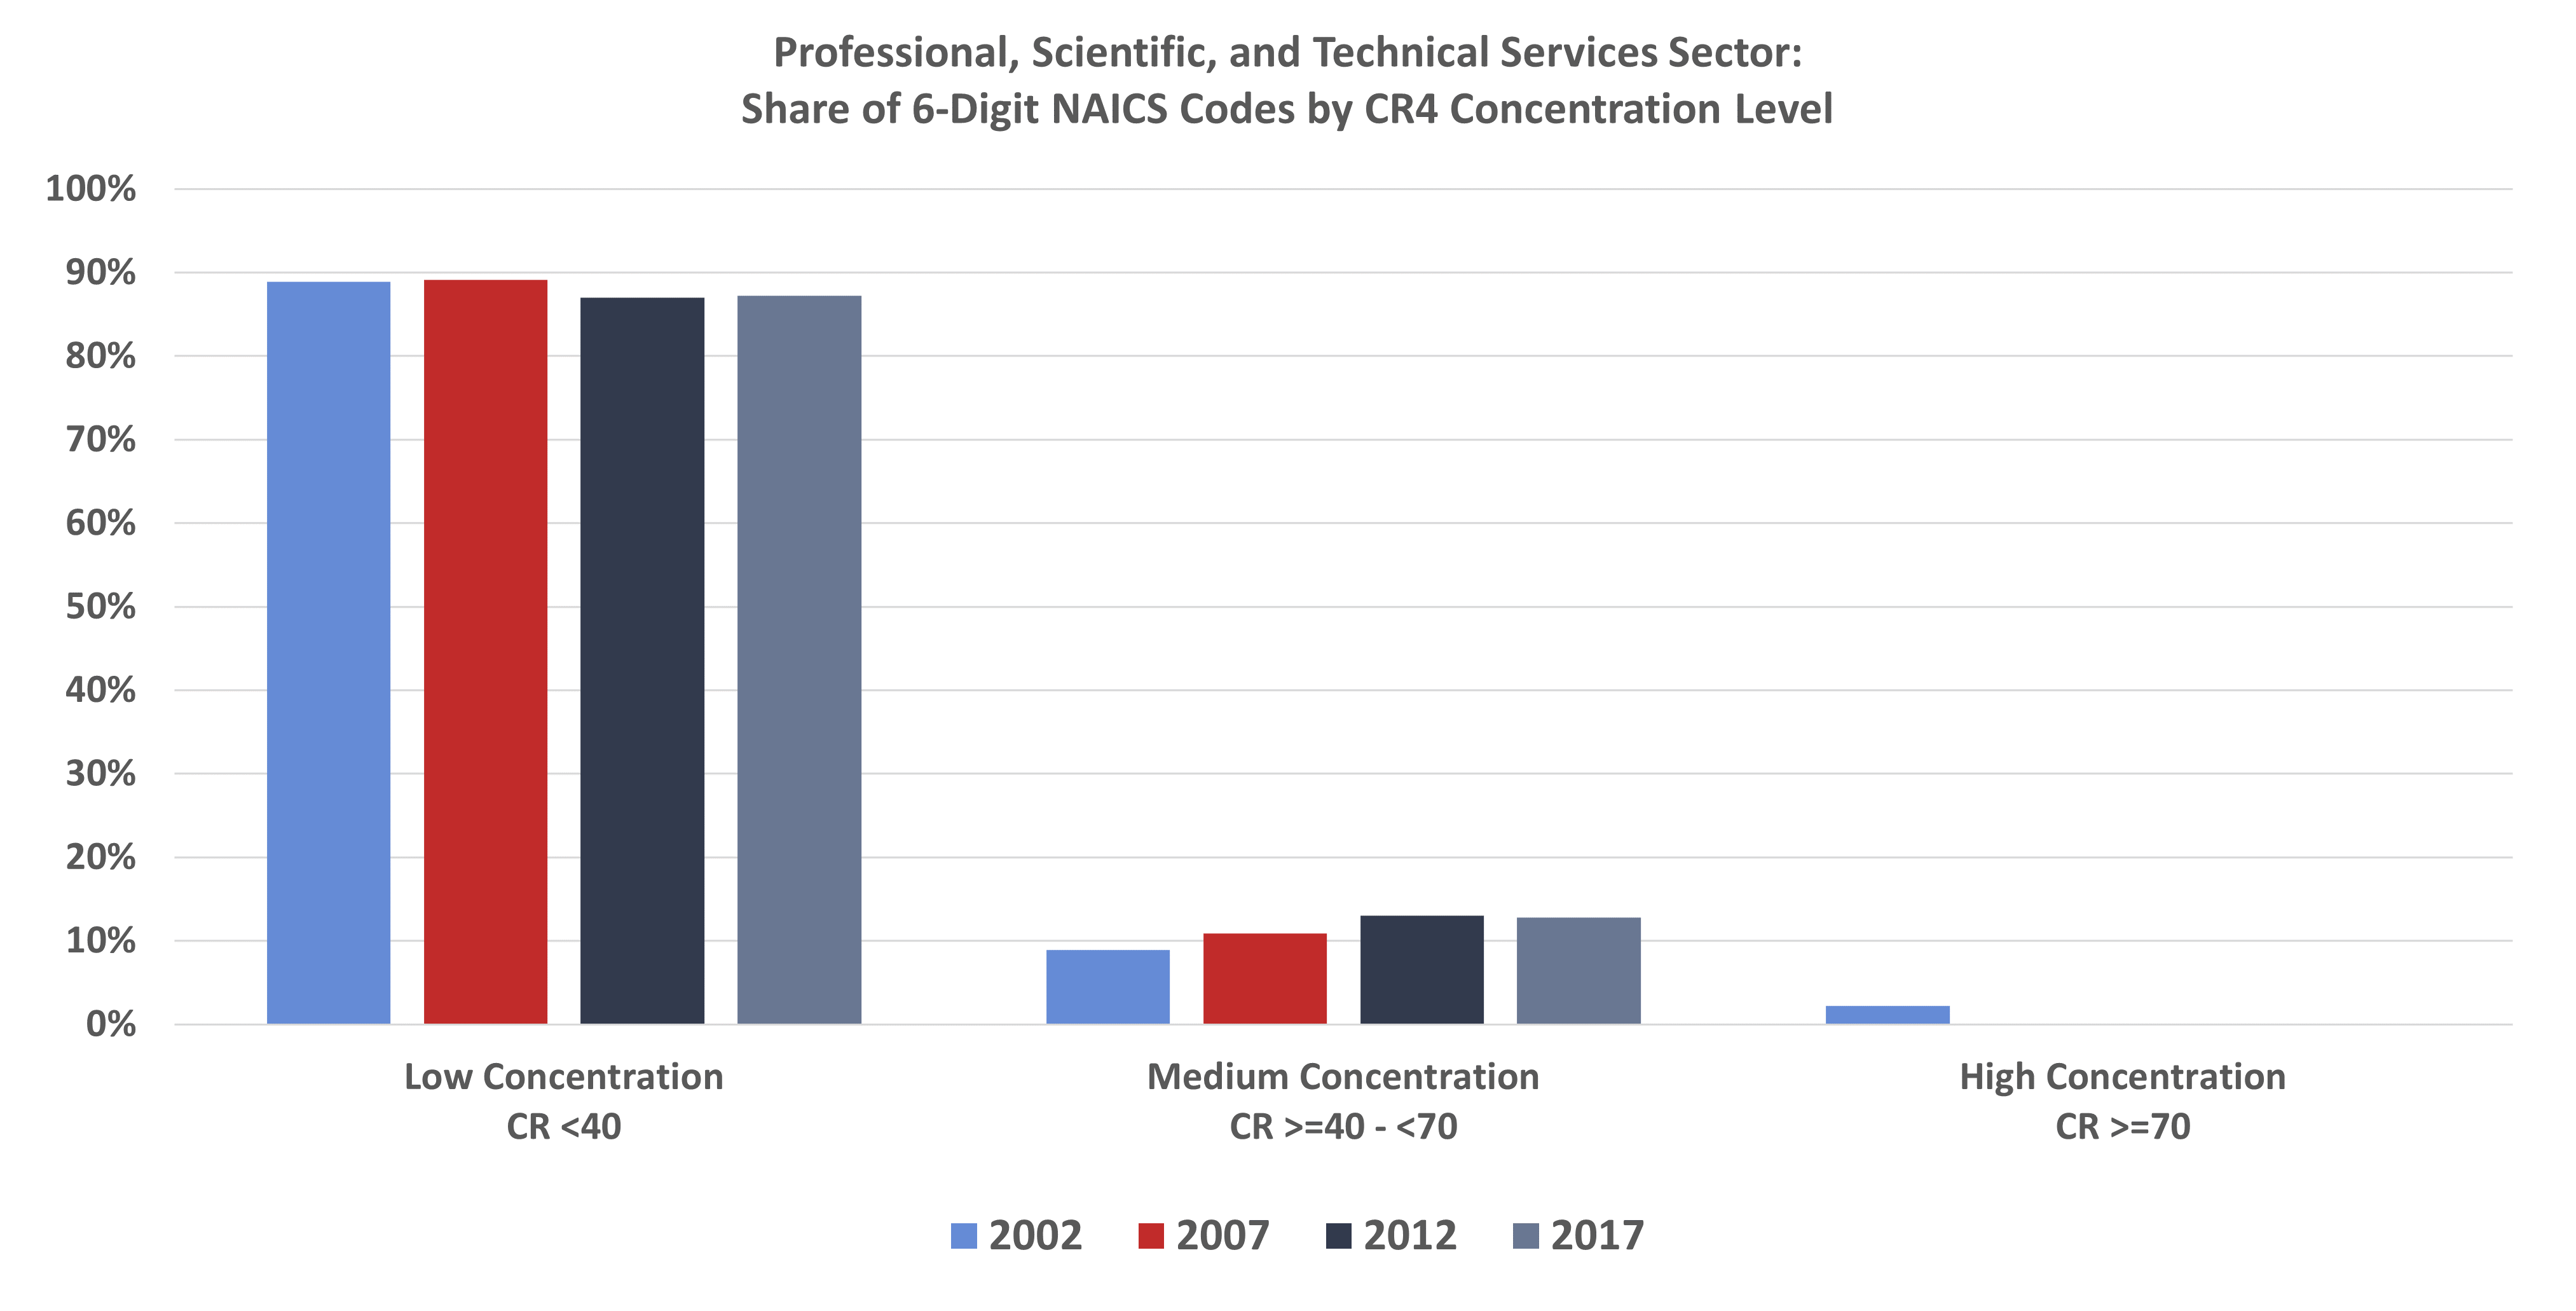 Professional, Scientific, and Technical Services Sector: Share of 6-Digit NAICS Codes by CR4 Concentration Level